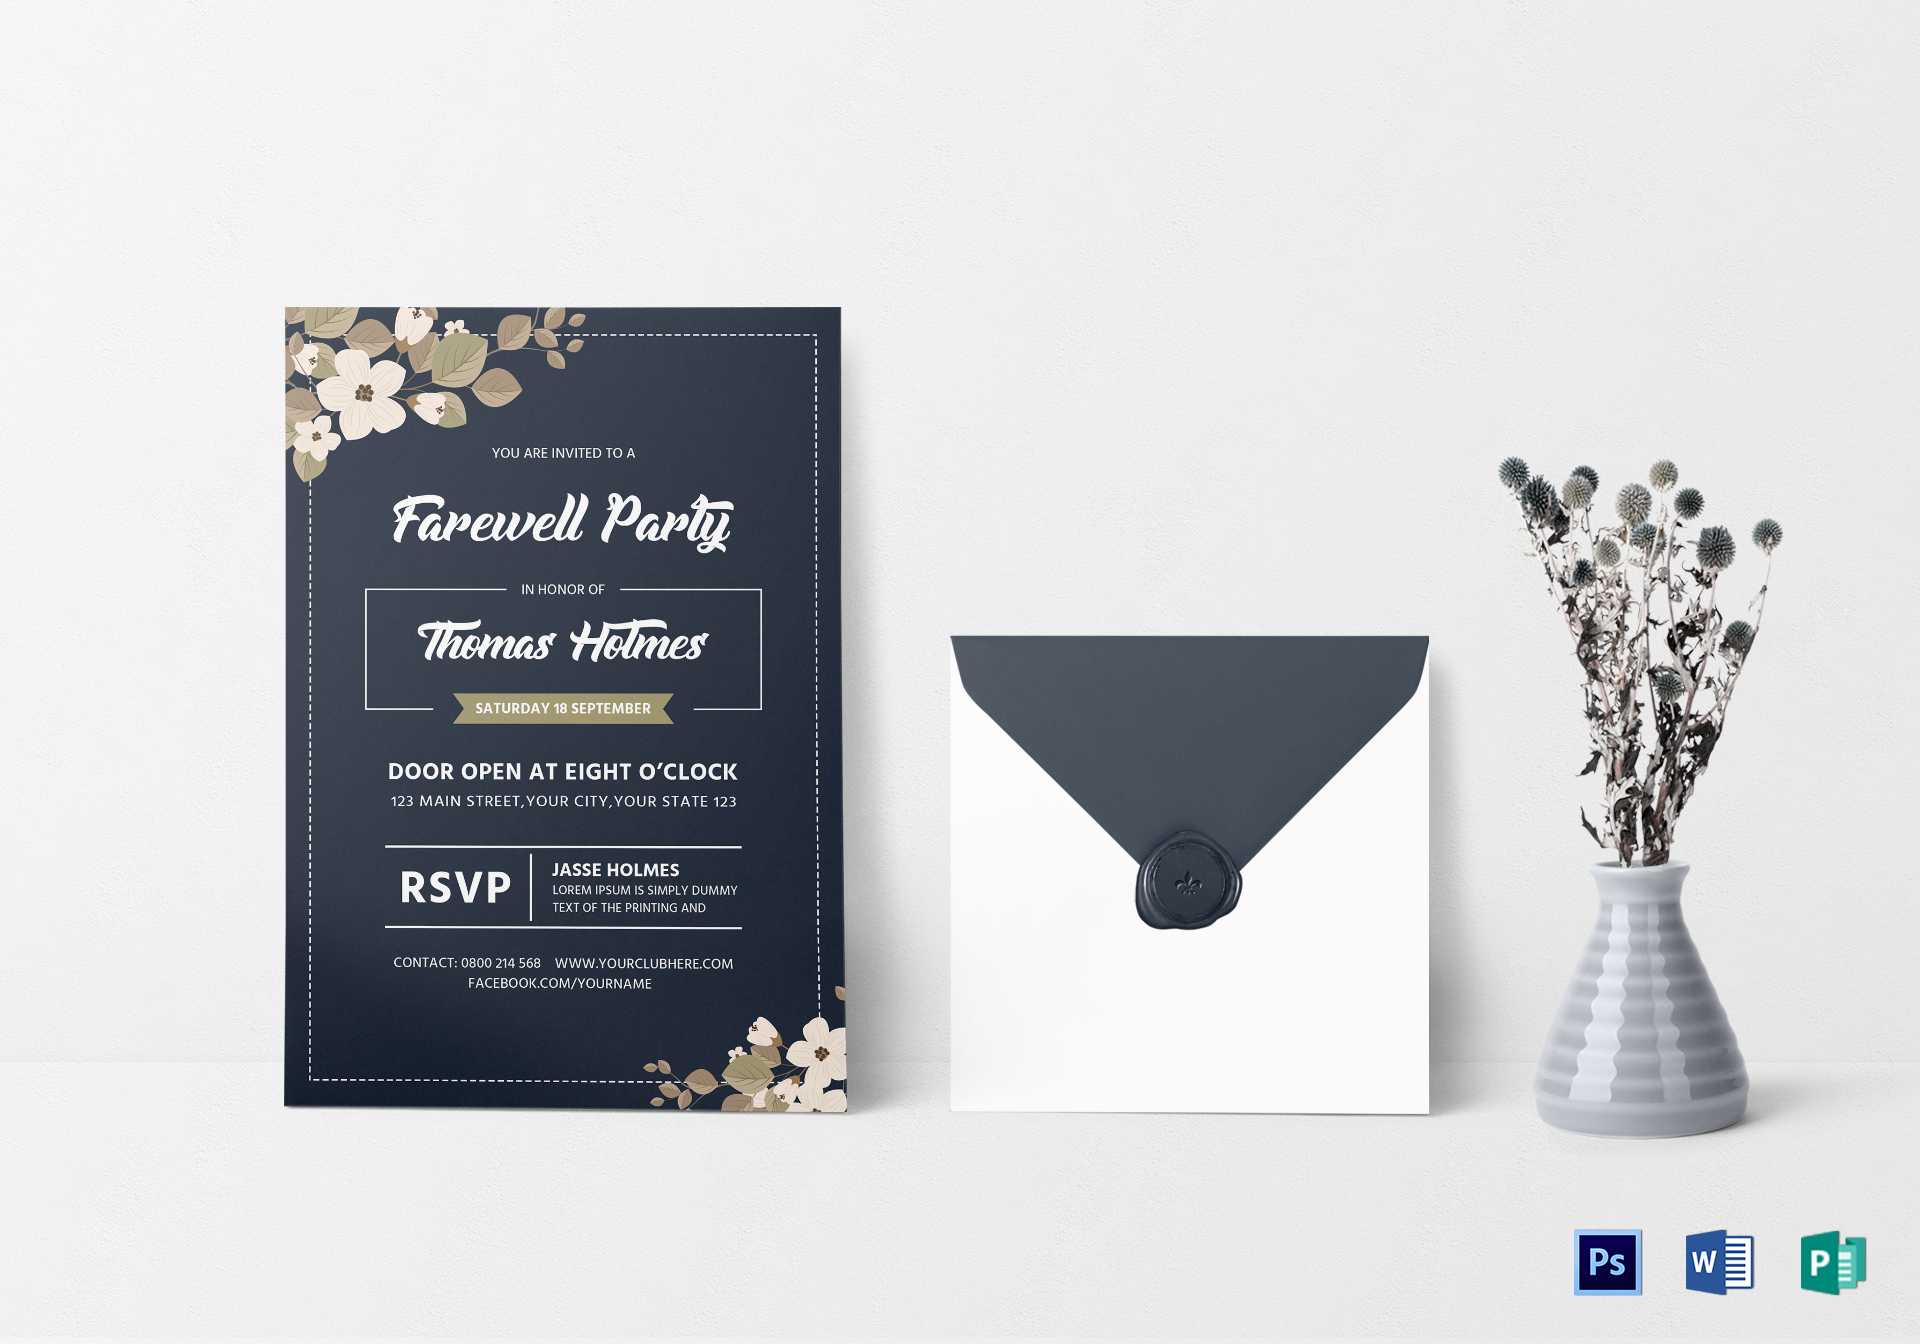 Farewell Party Invitation Card Template With Regard To Farewell Card Template Word